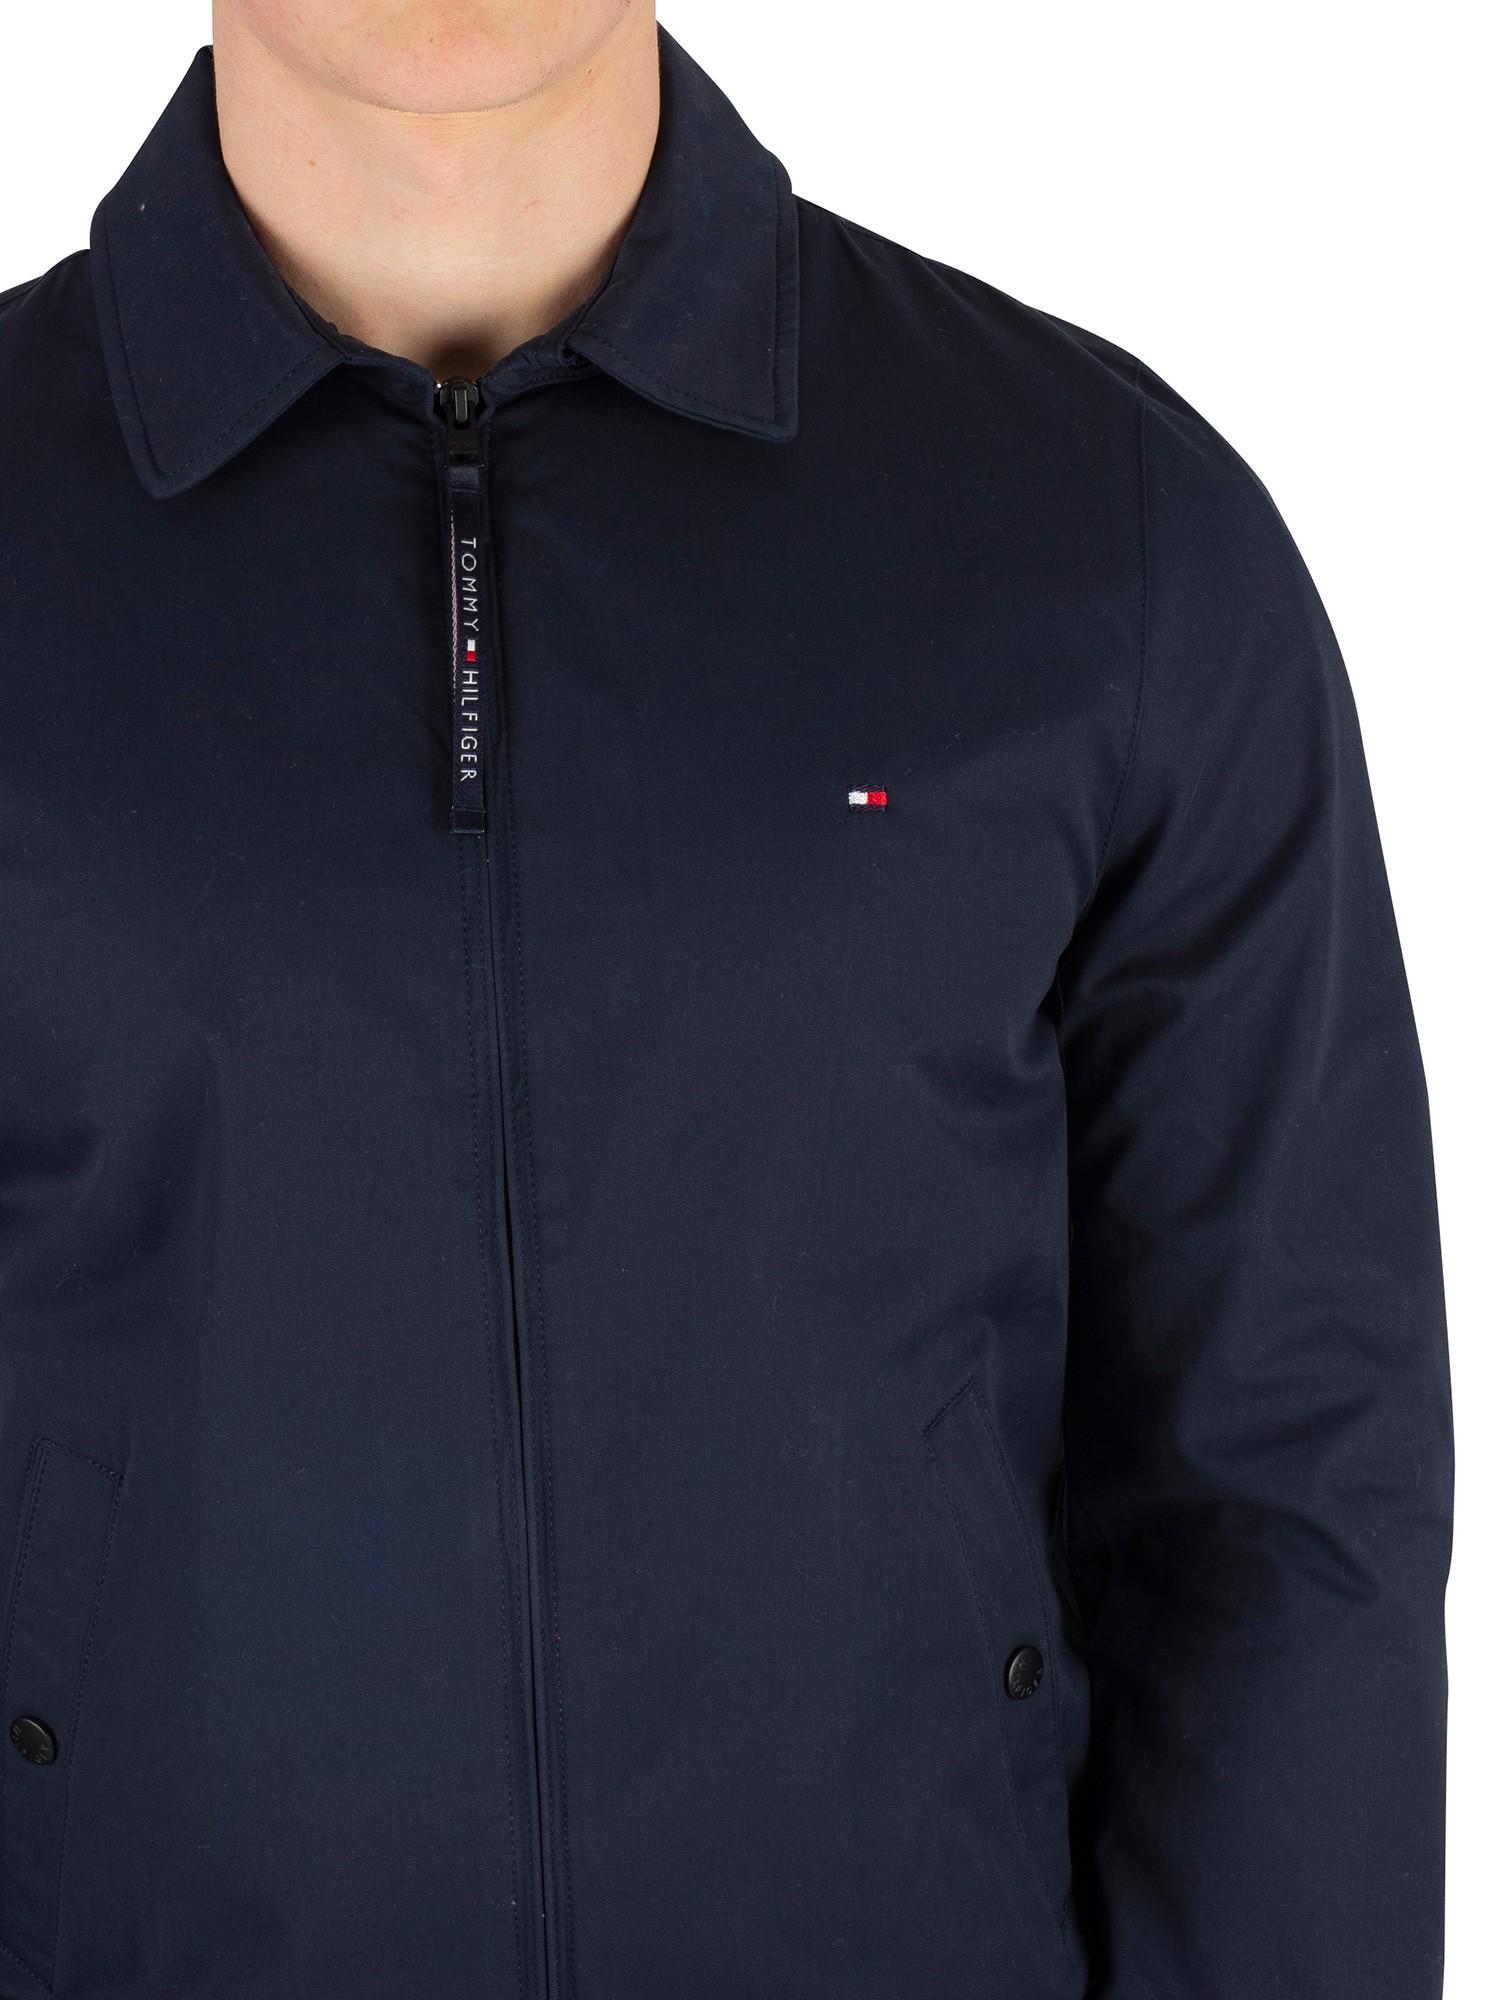 Tommy Hilfiger Cotton New Ivy Jacket in Blue for Men | Lyst